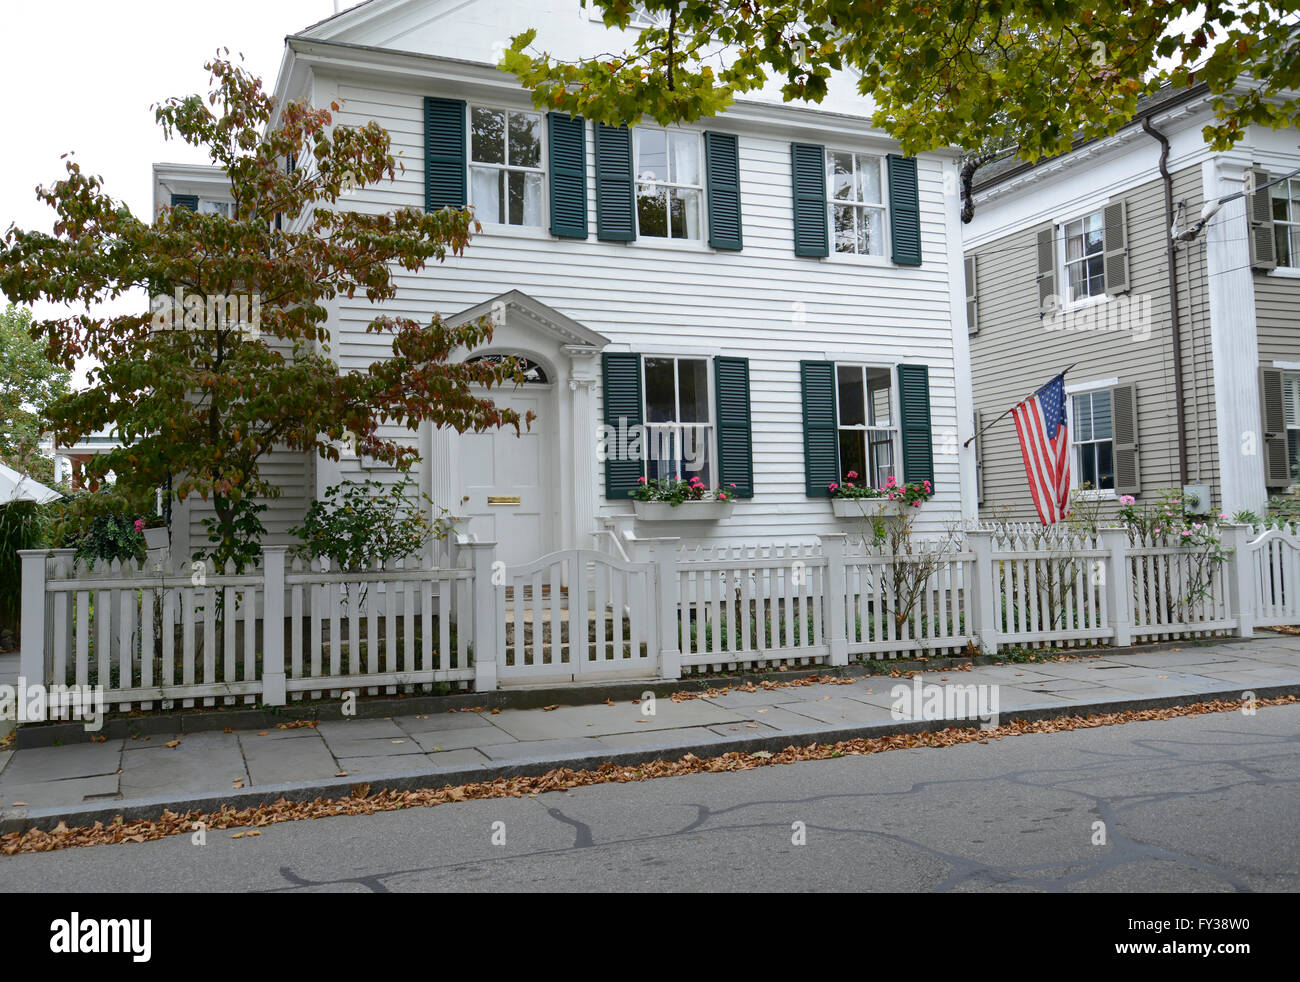 old federal style house in the quaint town of Stonington Connectict.  There is an American flag, white picket fence and slate si Stock Photo